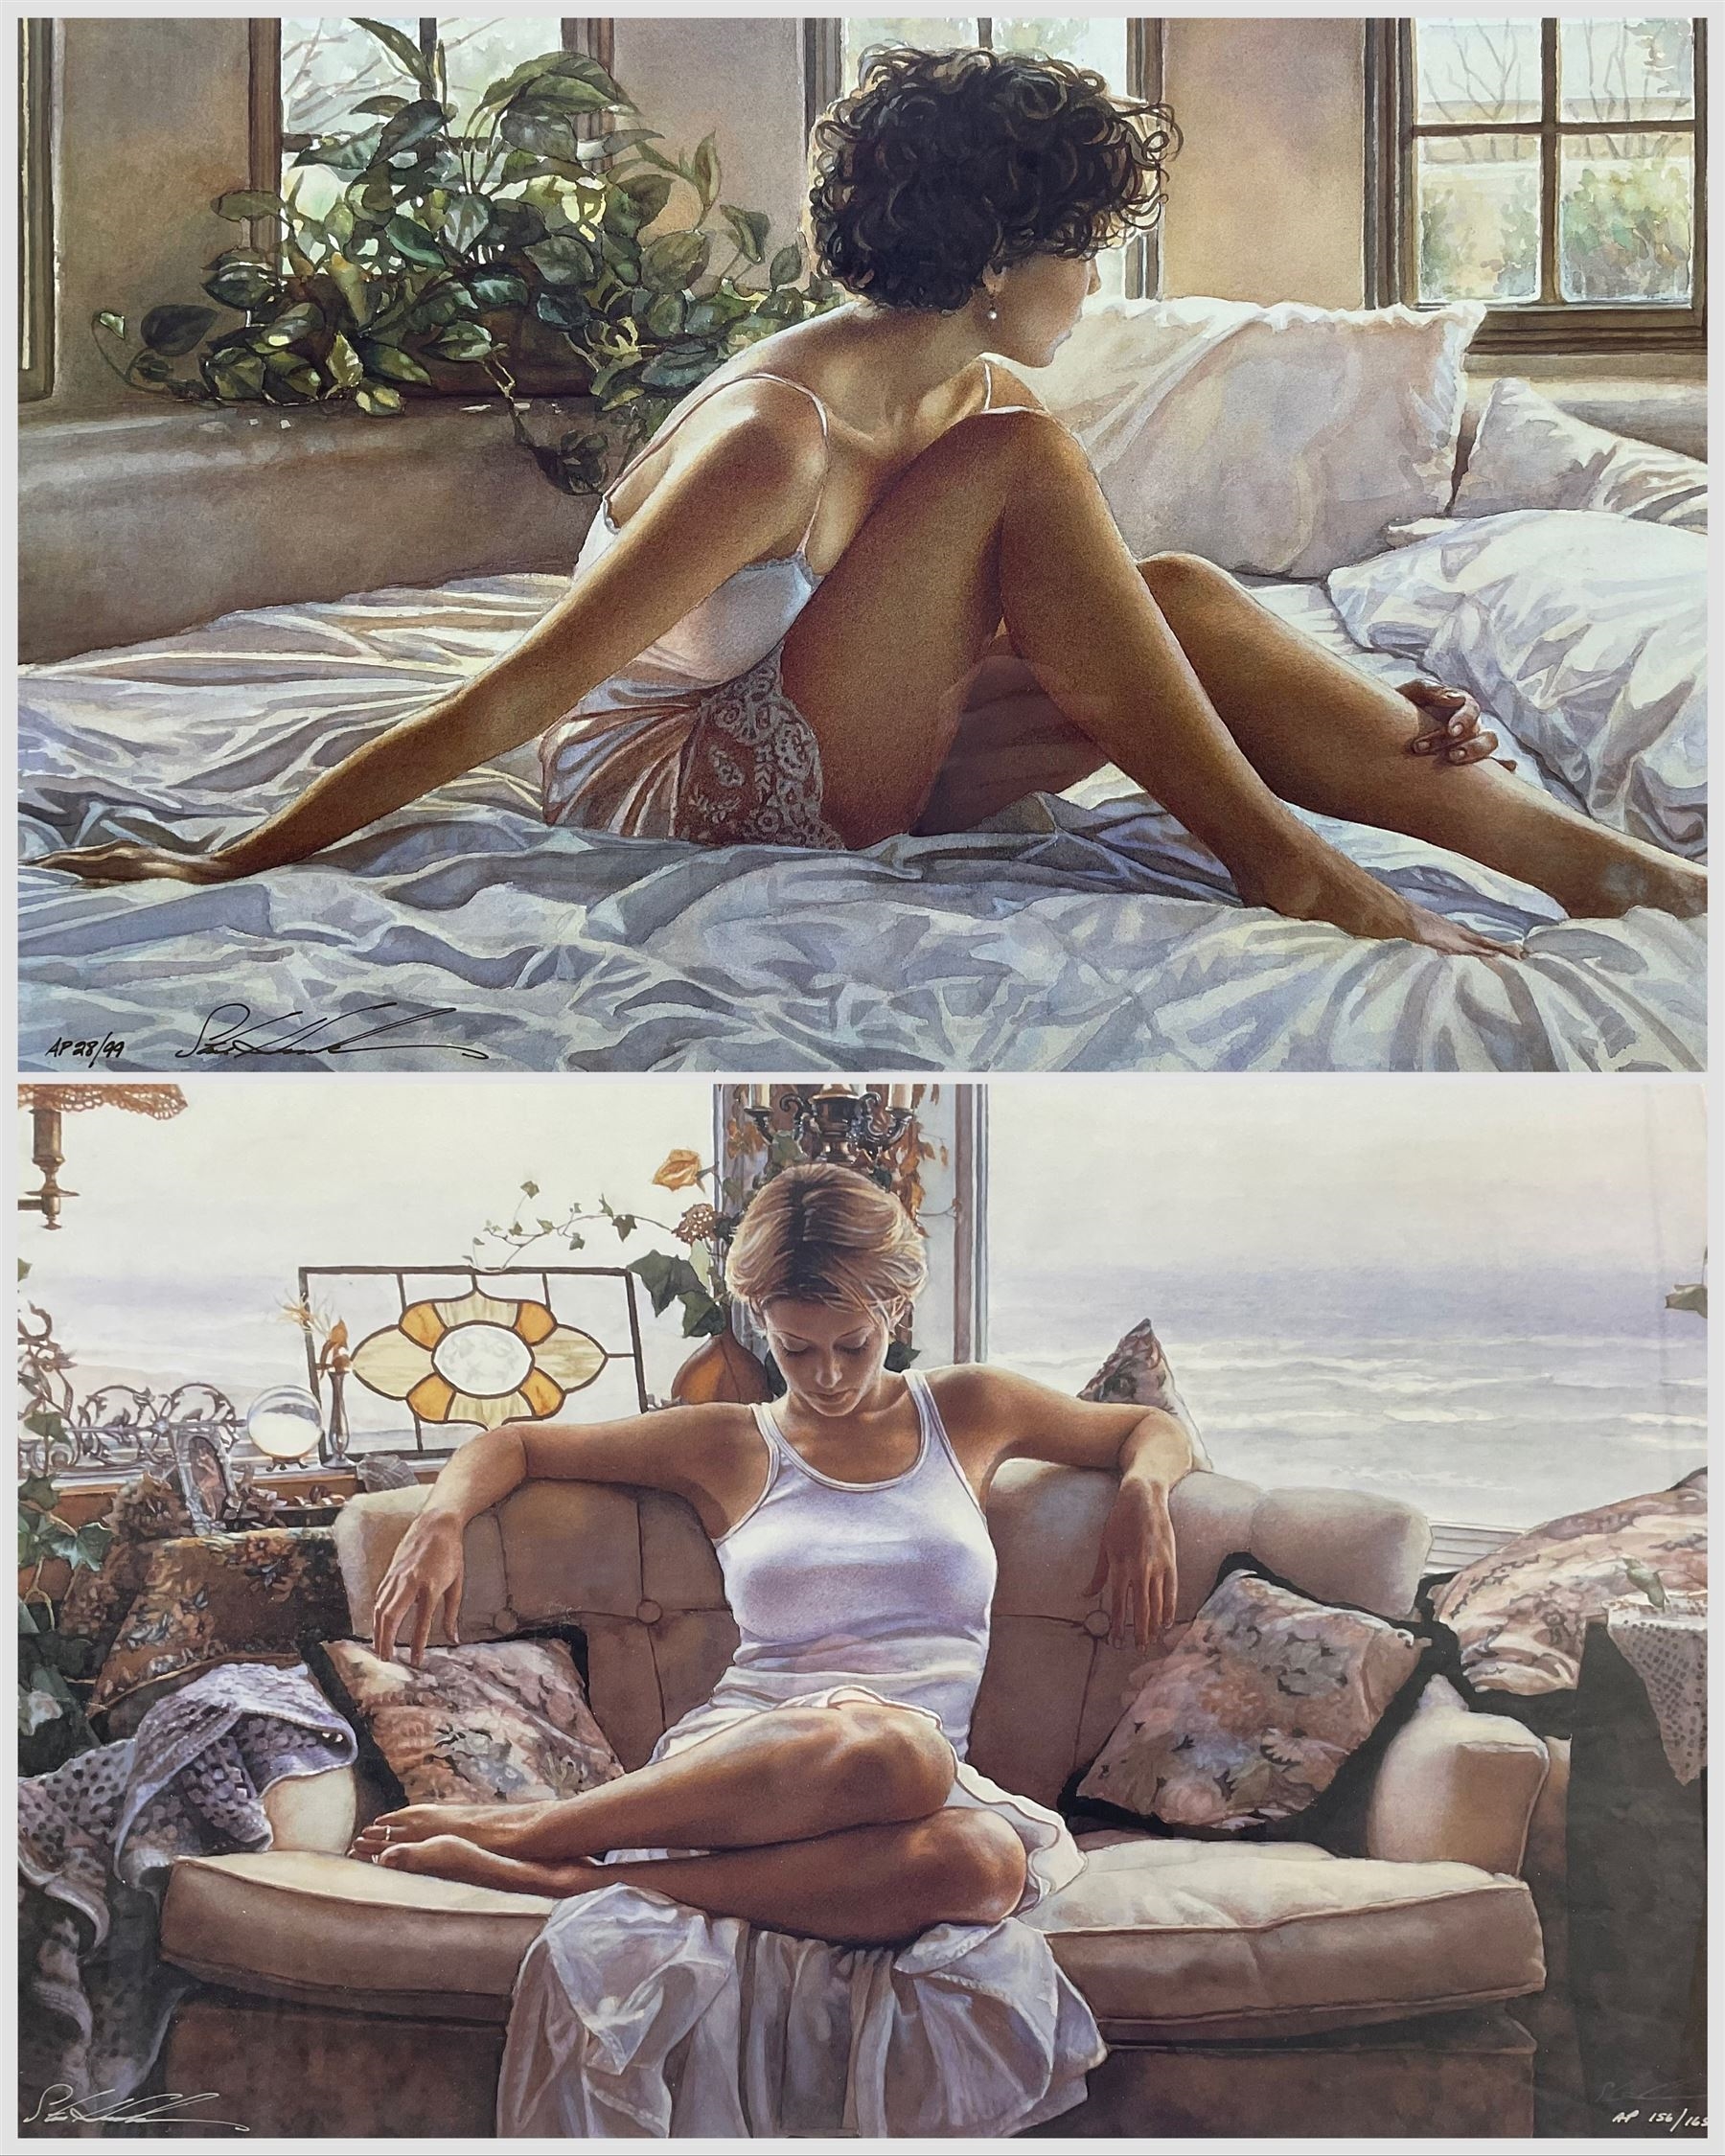 Southwestern Bedroom' and 'To Search Within - Steve Hanks